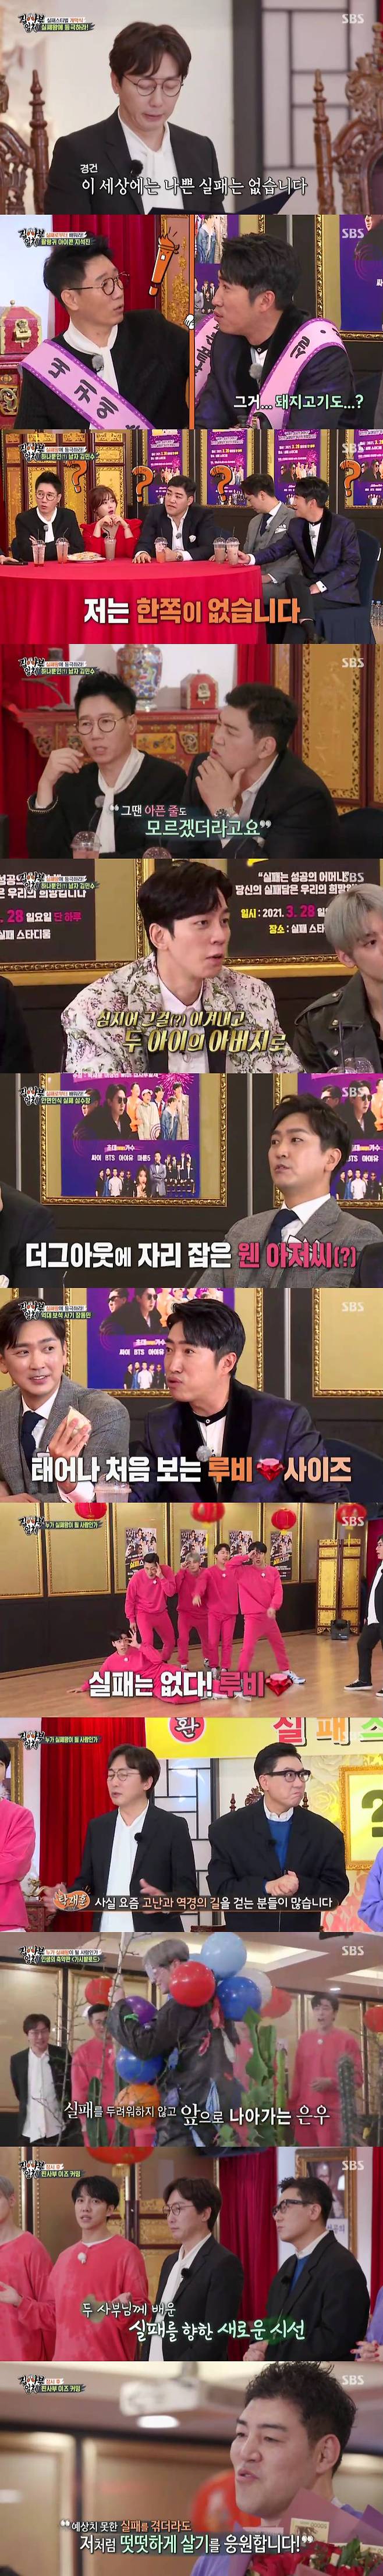 All The Butlers Kim Min-soo confessed to the loss of his testicles, and entertainment The Godfather Lee Kyung-kyu won the best minute.According to Nielsen Korea, a TV viewer rating research institute on the 29th, SBS All The Butlers TV viewer ratings in the metropolitan area recorded 5.5% in the first part and 6.5% in the second part.Target TV viewer ratings reached 2.9 percent, while top TV viewer ratings per minute rose to 8.2 percent.On the day of the show, Tak Jae-hun, Lee Sang-min, Failure Star Ji Suk-jin, Shim Soo-chang, Kim Min-soo, Jang Dong-min and Solbi appeared and performed Failure Stival.Tak Jae-hun said, There is no bad Failure in this world.Failure is part of its success, he said. The purpose of the Failure Festival is to come out of Failures experience and support the re-election of Failure stars. King Failure was given a one million won incentive for success.Failure stars have been laughing at the extraordinary Failure story, such as the investment Failure and the billion-dollar jewel fraud that have been going through.In particular, Kim Min-soo shocked everyone by saying that he lost one testicle during Martial arts Kyonggi.Kim Min-soo said, I was hit by the opponents kick in the second round, but the plastic foul cup, which is a players protective tool, was broken.I wanted something to be wrong, he recalled, but I was in the fourth round.Nevertheless, Kim Min-soo said he took a three-minute break and continued Kyonggi.Kim Min-soo said, I did not even know it was sick at the time. The members admired that it is a great thing to play Kyonggi again when it is a pain that can not be imagined.Even Kim Min-soo was cheered by everyone who said he won the Kyonggi that day.Kim Min-soo, who later went to the hospital in an ambulance, had surgery to remove the blood from his leg, and the members applauded, saying, He survived and became a father of two children.G Suk-jin, Shim Soo-chang, Kim Min-soo, Jang Dong-min, Solbi, and Tak Jae-hun and Lee Sang-min prepared by Lee Seung-gi, Yang Se-hyung, Shin Sung-rok, Jung Eun-woo, Kim Dong-hyun and Failure Star Ji Suk-jin Aim challenged Innocent Thing Field RoadIt was the rule that a team that bursts fewer balloons as it passed through the Innocent Thing Field Road won.Lee Sang-min added, I taste a lot of Failure, endure the trials, overcome them, and finally get out of the way.I will go without giving up on any Innocent Thing field in front of me, said Jung Eun-woo, a strong aspiration.Thanks to the support of the members, Jung Eun-woo passed through the Innocent Thing Field safely and left 11 balloons.However, Kim Min-soo left 15 balloons and the Failure Star team won.Since then, the group Game In the Well has been conducted, and Kim Min-soo has won the final result of Failure King.Kim Min-soo said, I hope I will live like a man like me even if I have an unexpected failure.At the end of the broadcast, members gathered in the mountain of Inje, Gangwon Province were revealed.Is not it a natural master? In front of the members who wondered about the identity of the master, someone who said that he was a master of the master appeared.As he was leading the members to the place where Master is, he explained to Master, Master had a rich movie and honor that was unrivaled when he was in the city, but he entered the school a month ago, saying, I will leave the world before the world abandons me.At the end of the mountain trail along the school, I saw the back of the Master, who was in the valley with a questionable purple dress.The identity of the Master was the entertainment The Godfather Lee Kyung-kyu.Lee Kyung-kyu said, I invited him to this deep mountain to tell me how to live for 10 years in the entertainment industry. He laughed, saying, I eat it day by day for the next 10 years.The scene in which Lee Kyung-kyu appeared in front of the members in the same way as Doin took the best one minute with 8.2% of TV viewer ratings per minute.=